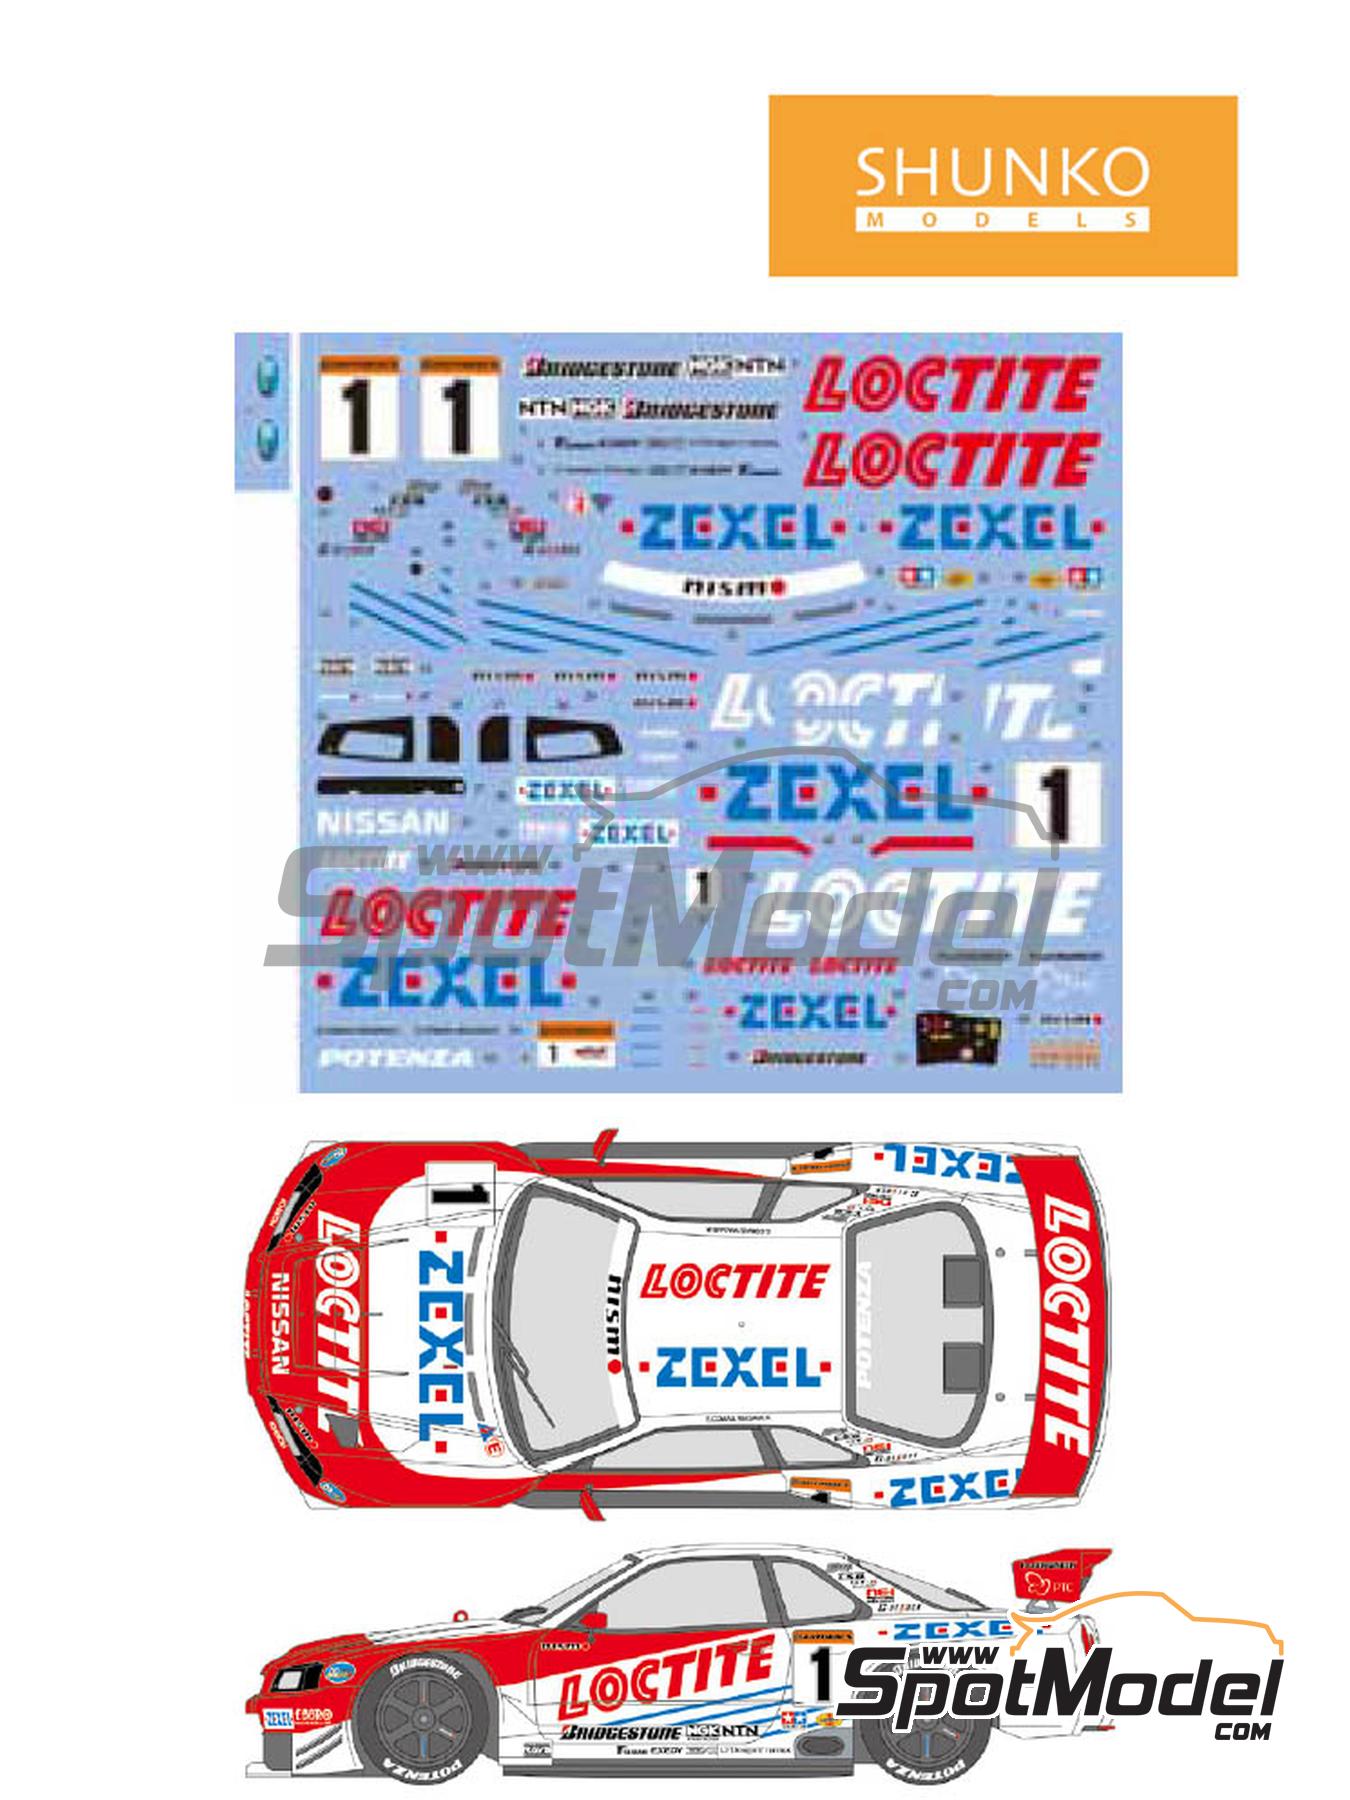 Nissan Skyline GT-R (R34) Nismo Team sponsored by Loctite, Zexel - Japanese  Grand Touring Car Championship (JGTC) 2000. Marking / livery in 1/24 scale